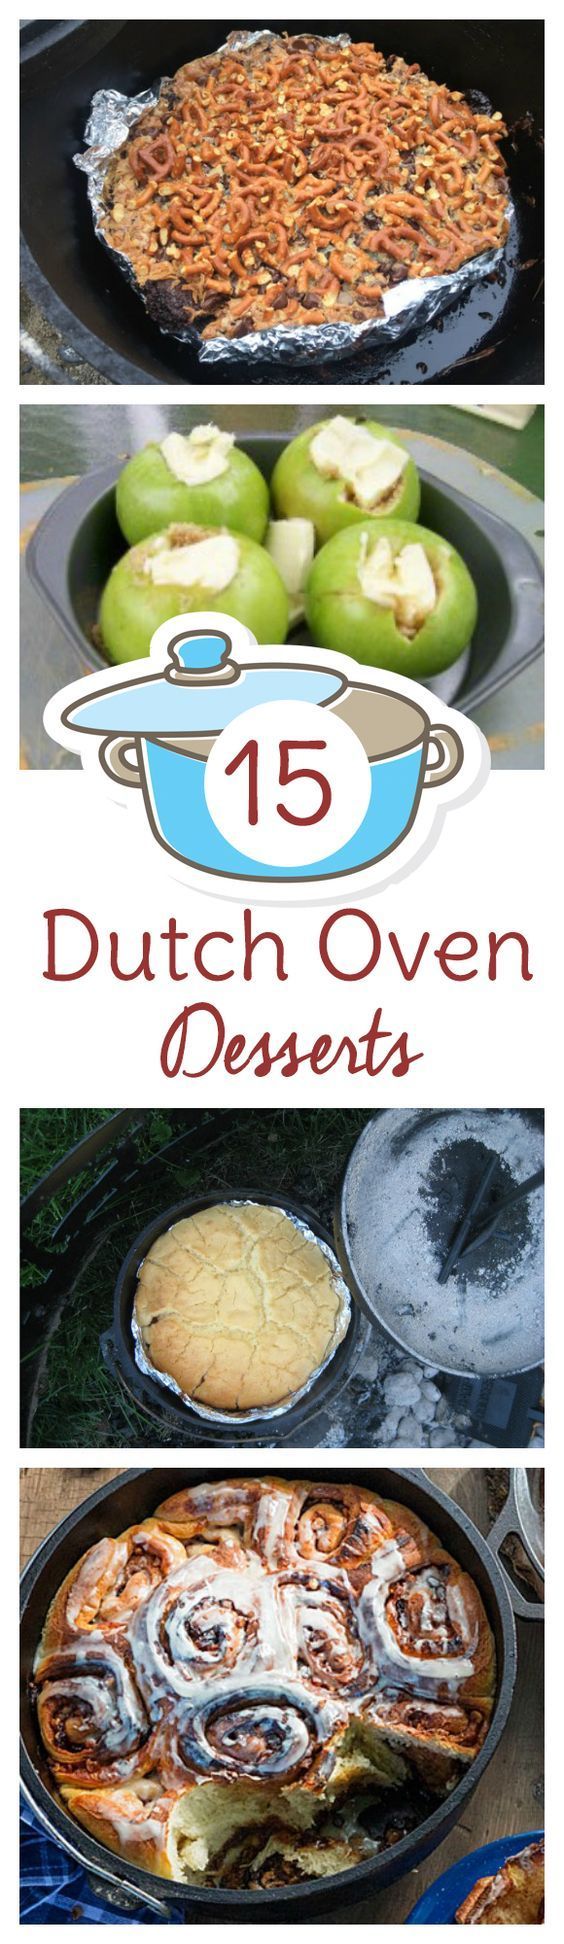 Whether you’re into camping or preparedness or just love cooking with cast iron, you’ll love these dutch oven dessert recipes.